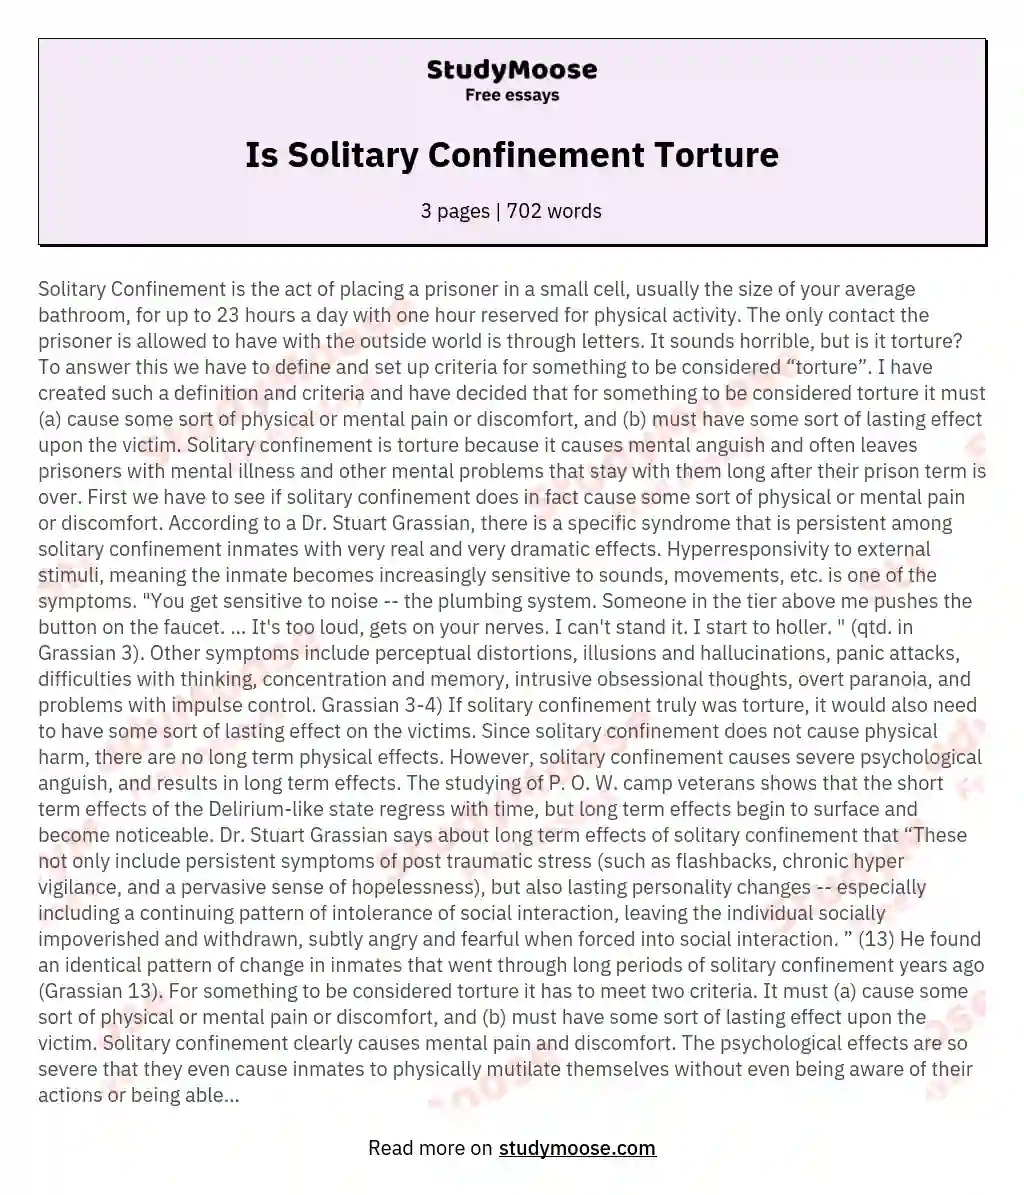 Is Solitary Confinement Torture